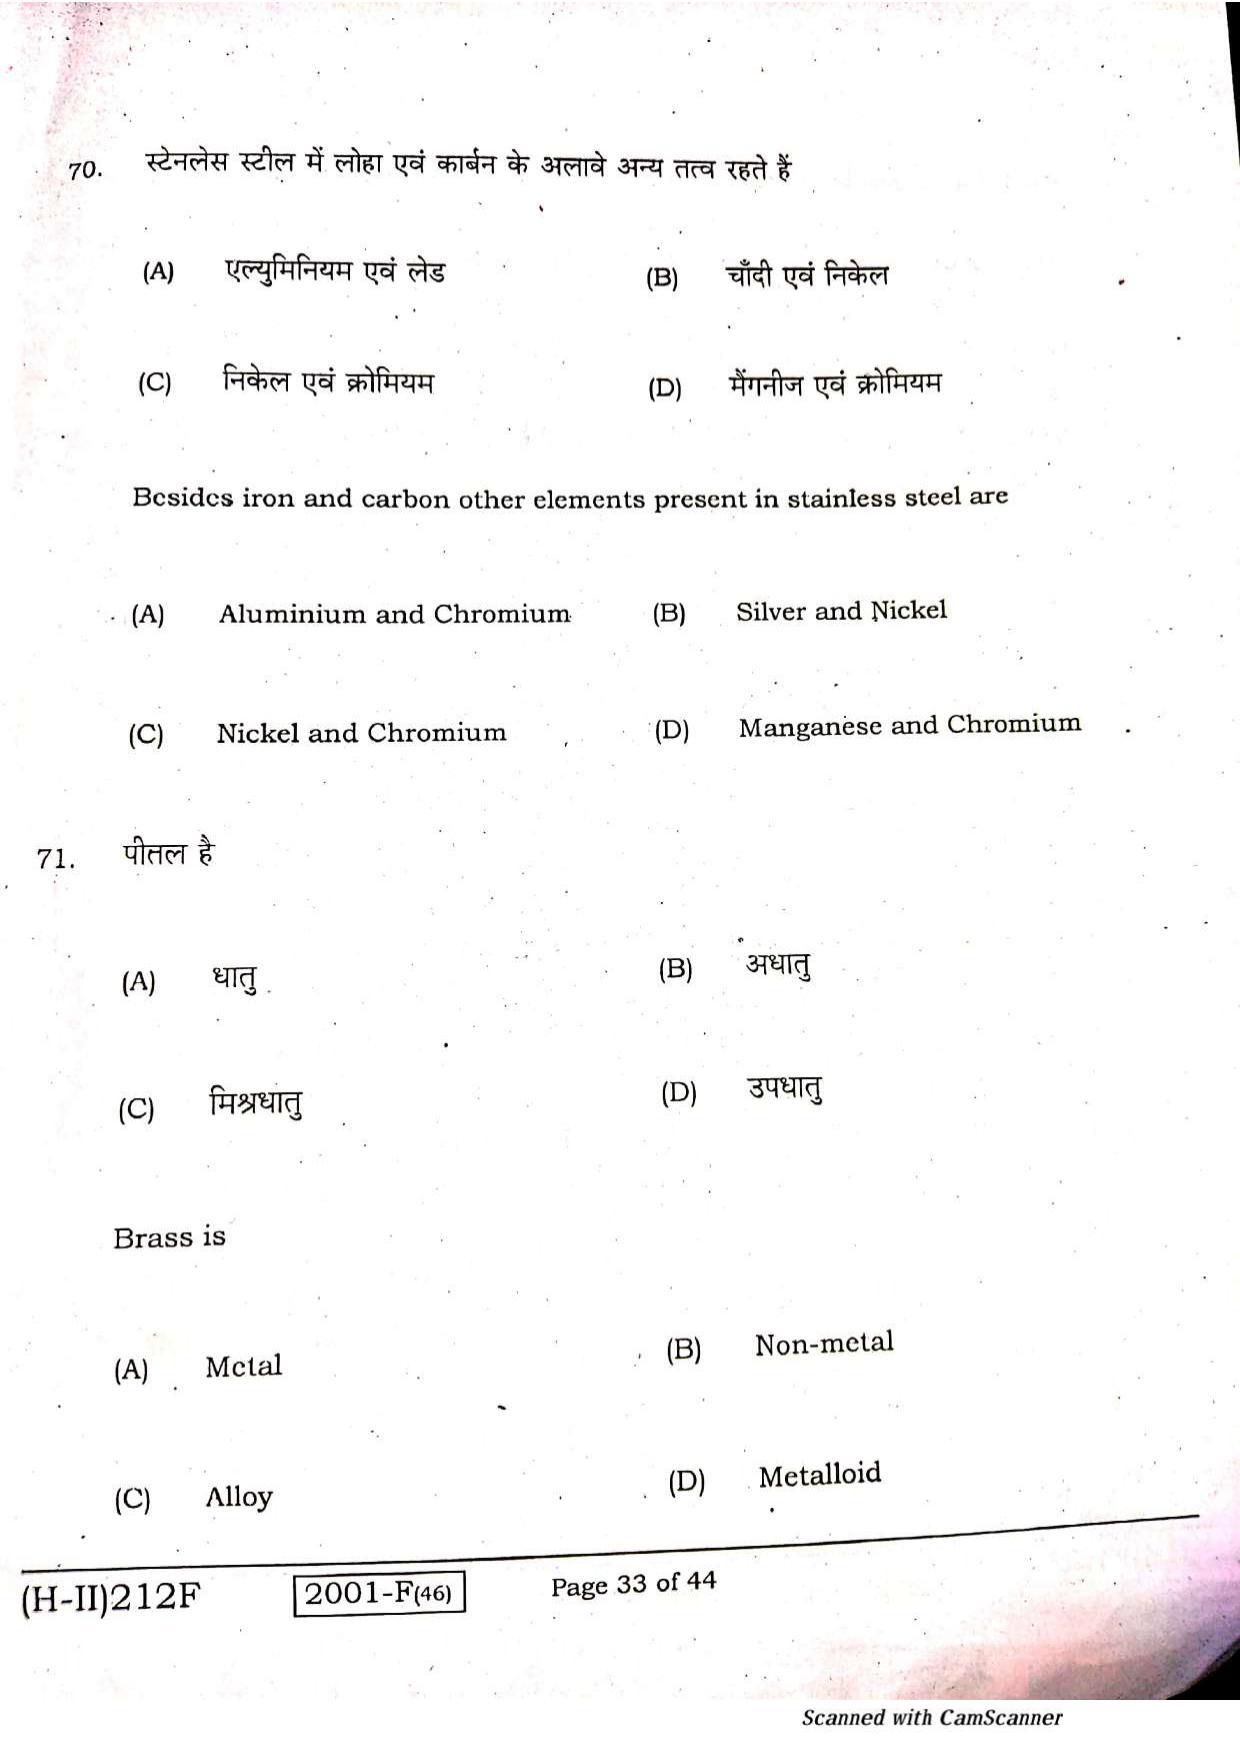 Bihar Board Class 10 Science 2021 (2nd Sitting) Question Paper - Page 31